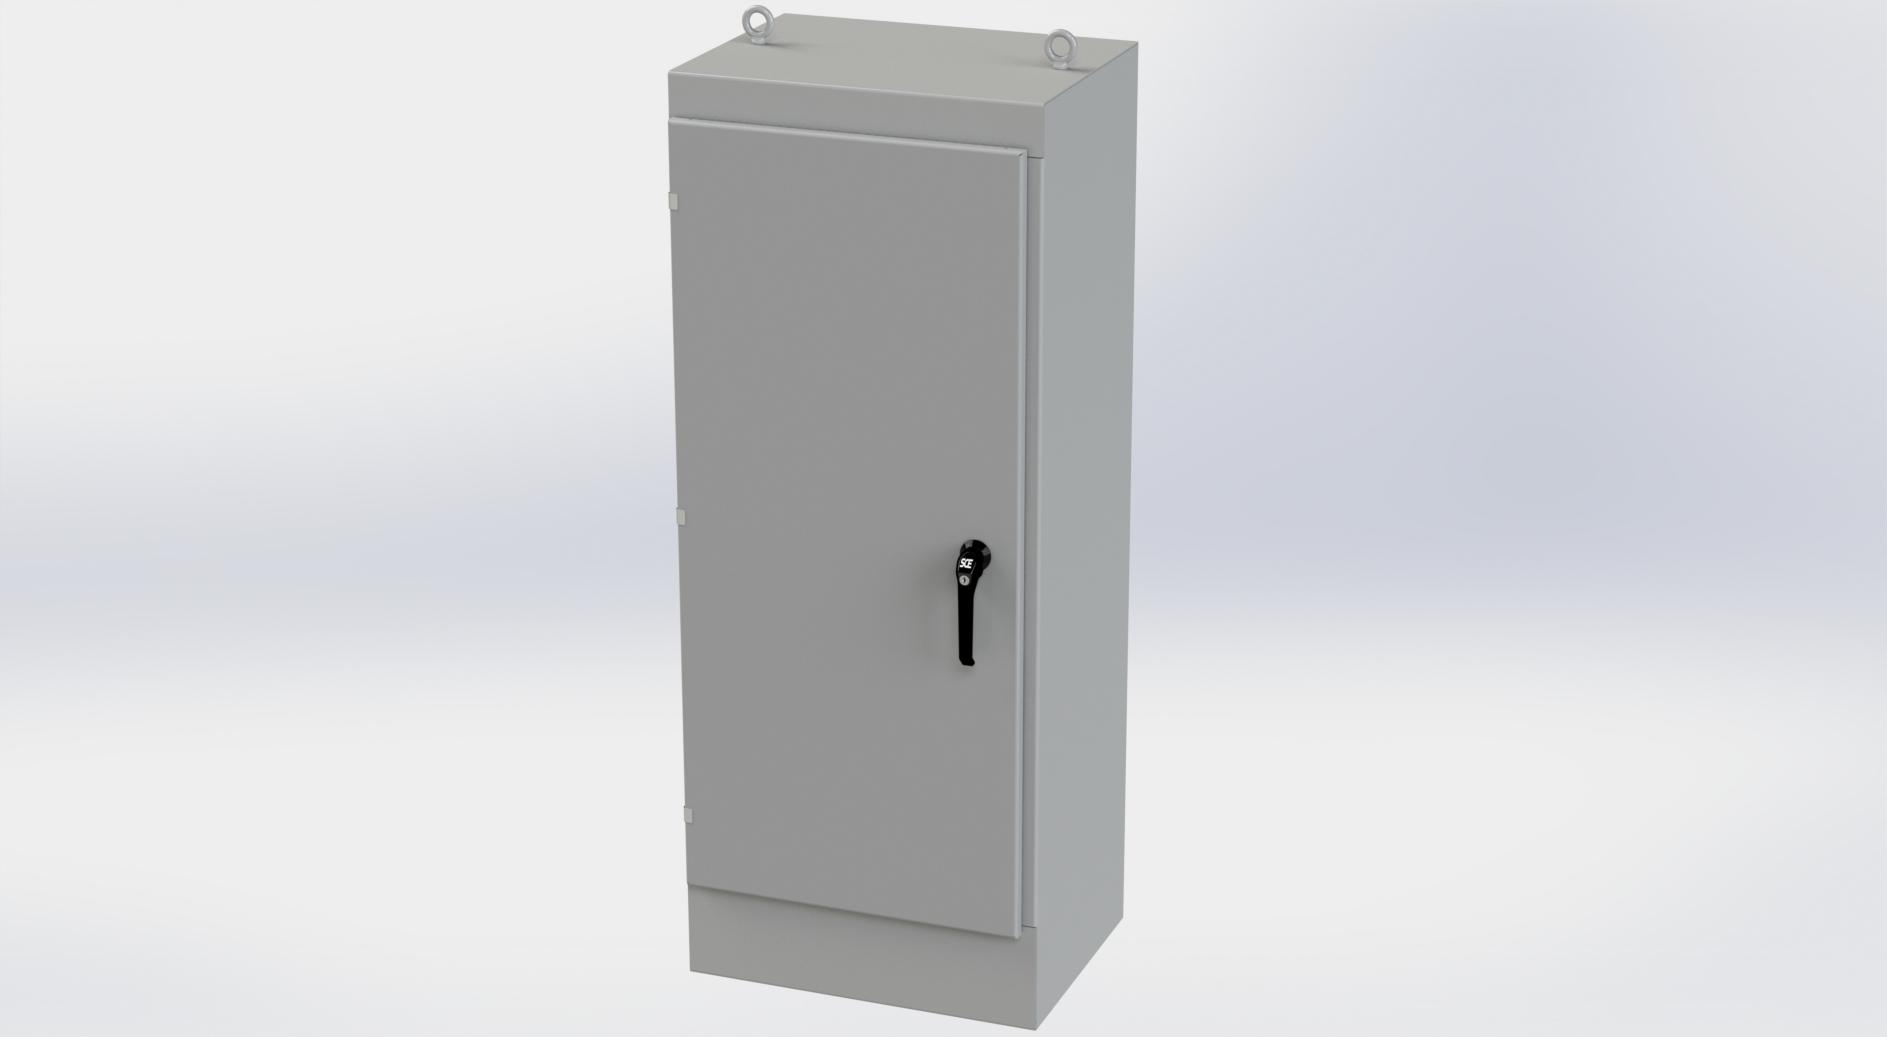 Saginaw Control SCE-60EL2418FS EL FS Enclosure, Height:60.00", Width:24.00", Depth:18.00", ANSI-61 gray powder coat inside and out. Optional sub-panels are powder coated white.